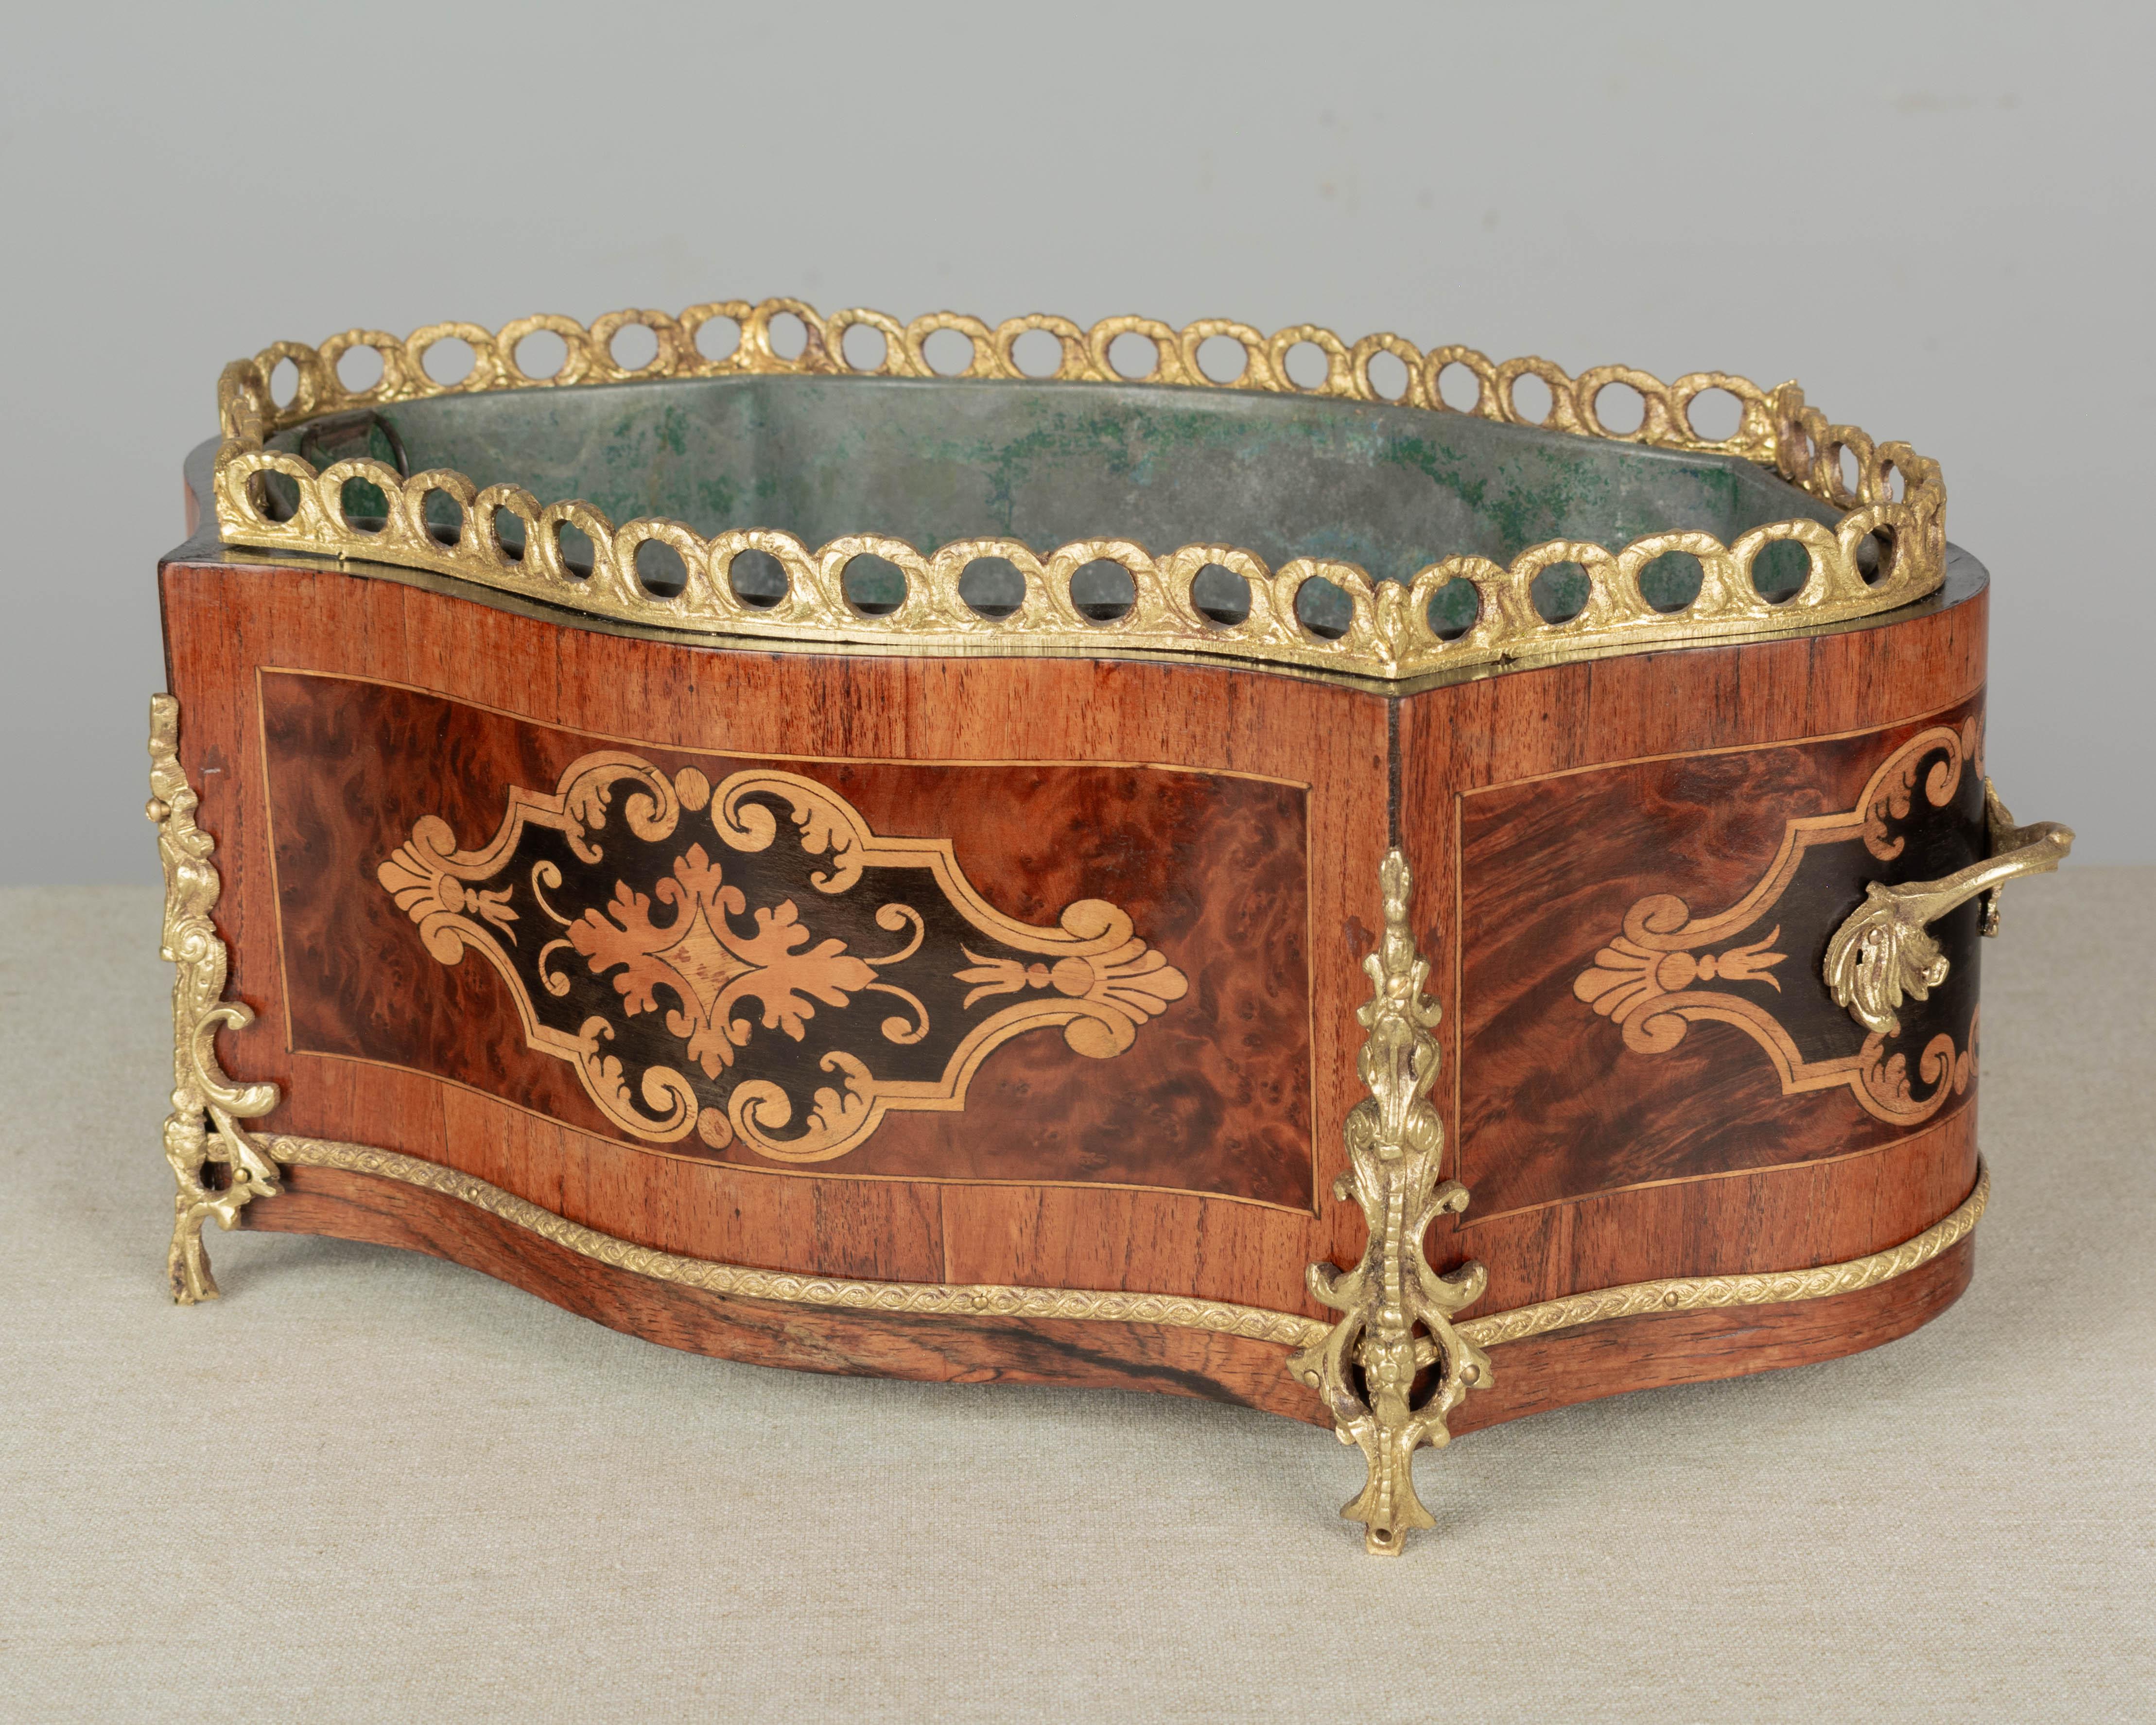 French Napoleon III Jardinière or Planter In Good Condition For Sale In Winter Park, FL